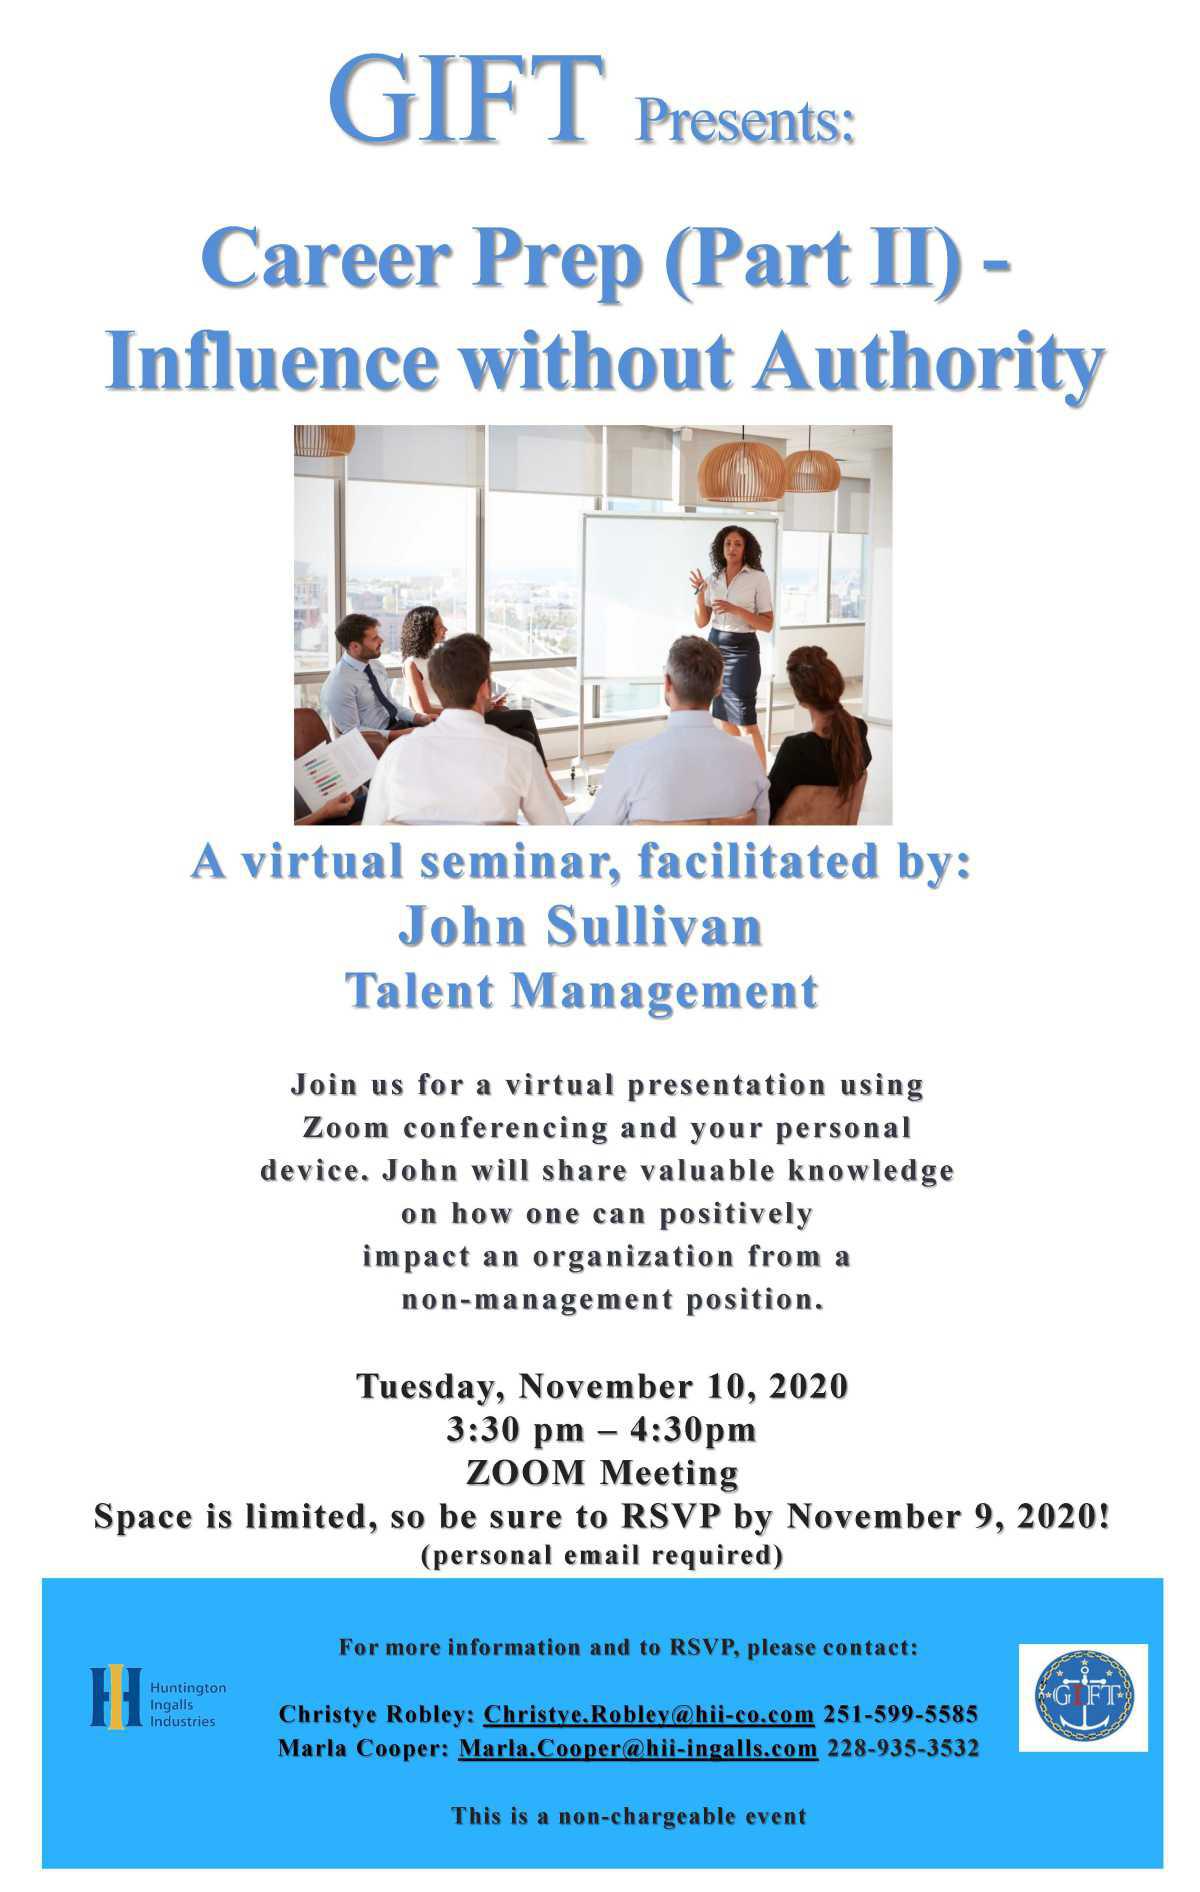 GIFT presents Influence without Authority virtual event November 10